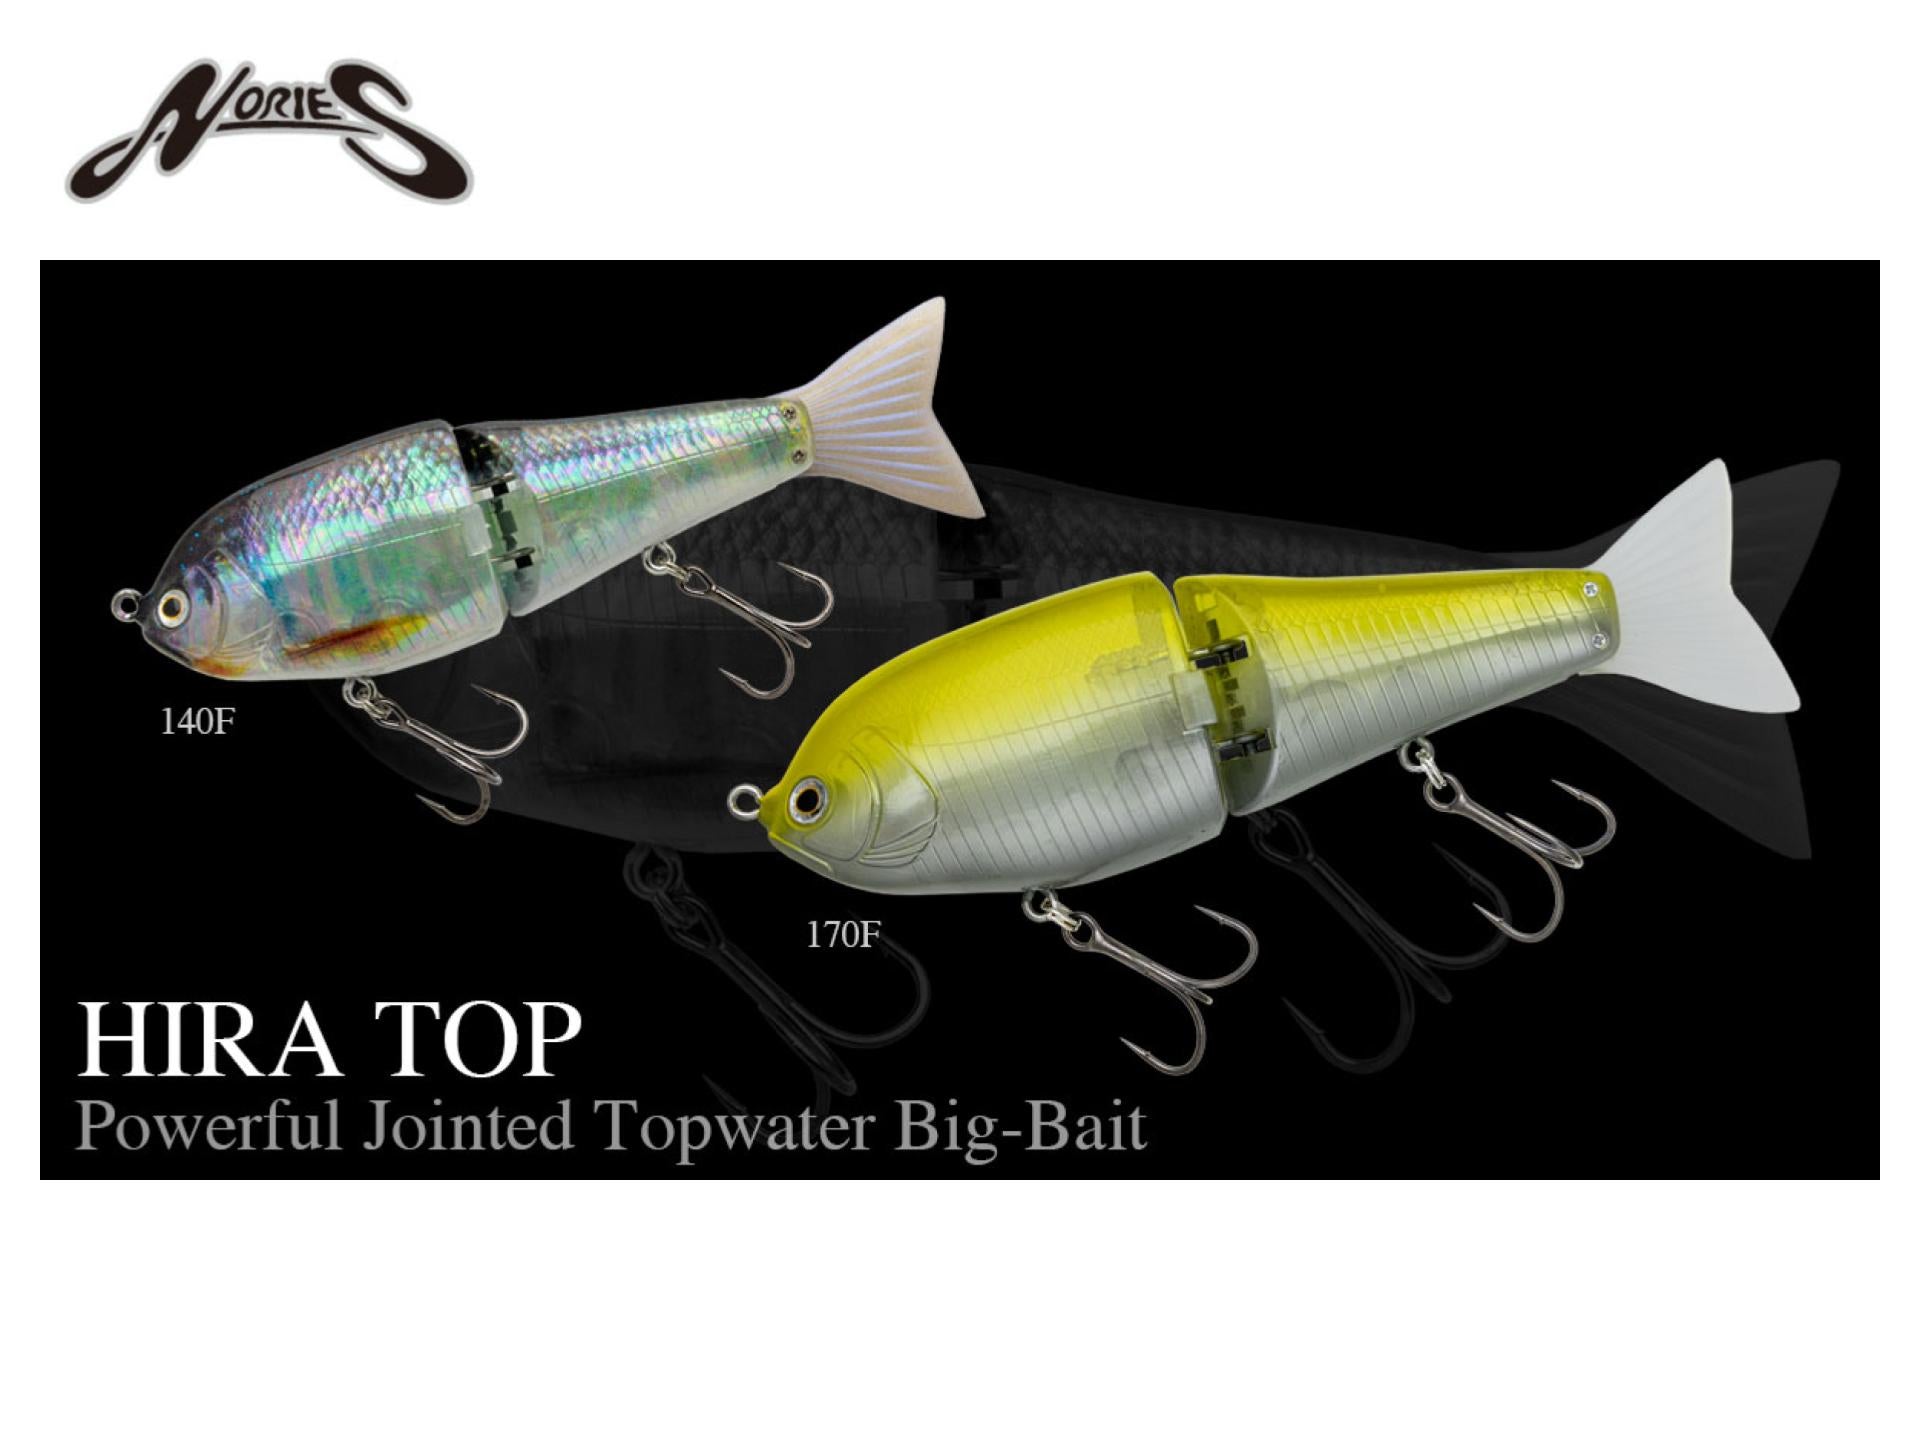 Nories HIRA TOP the Powerful Jointed Topwater Big-Bait – JDM 